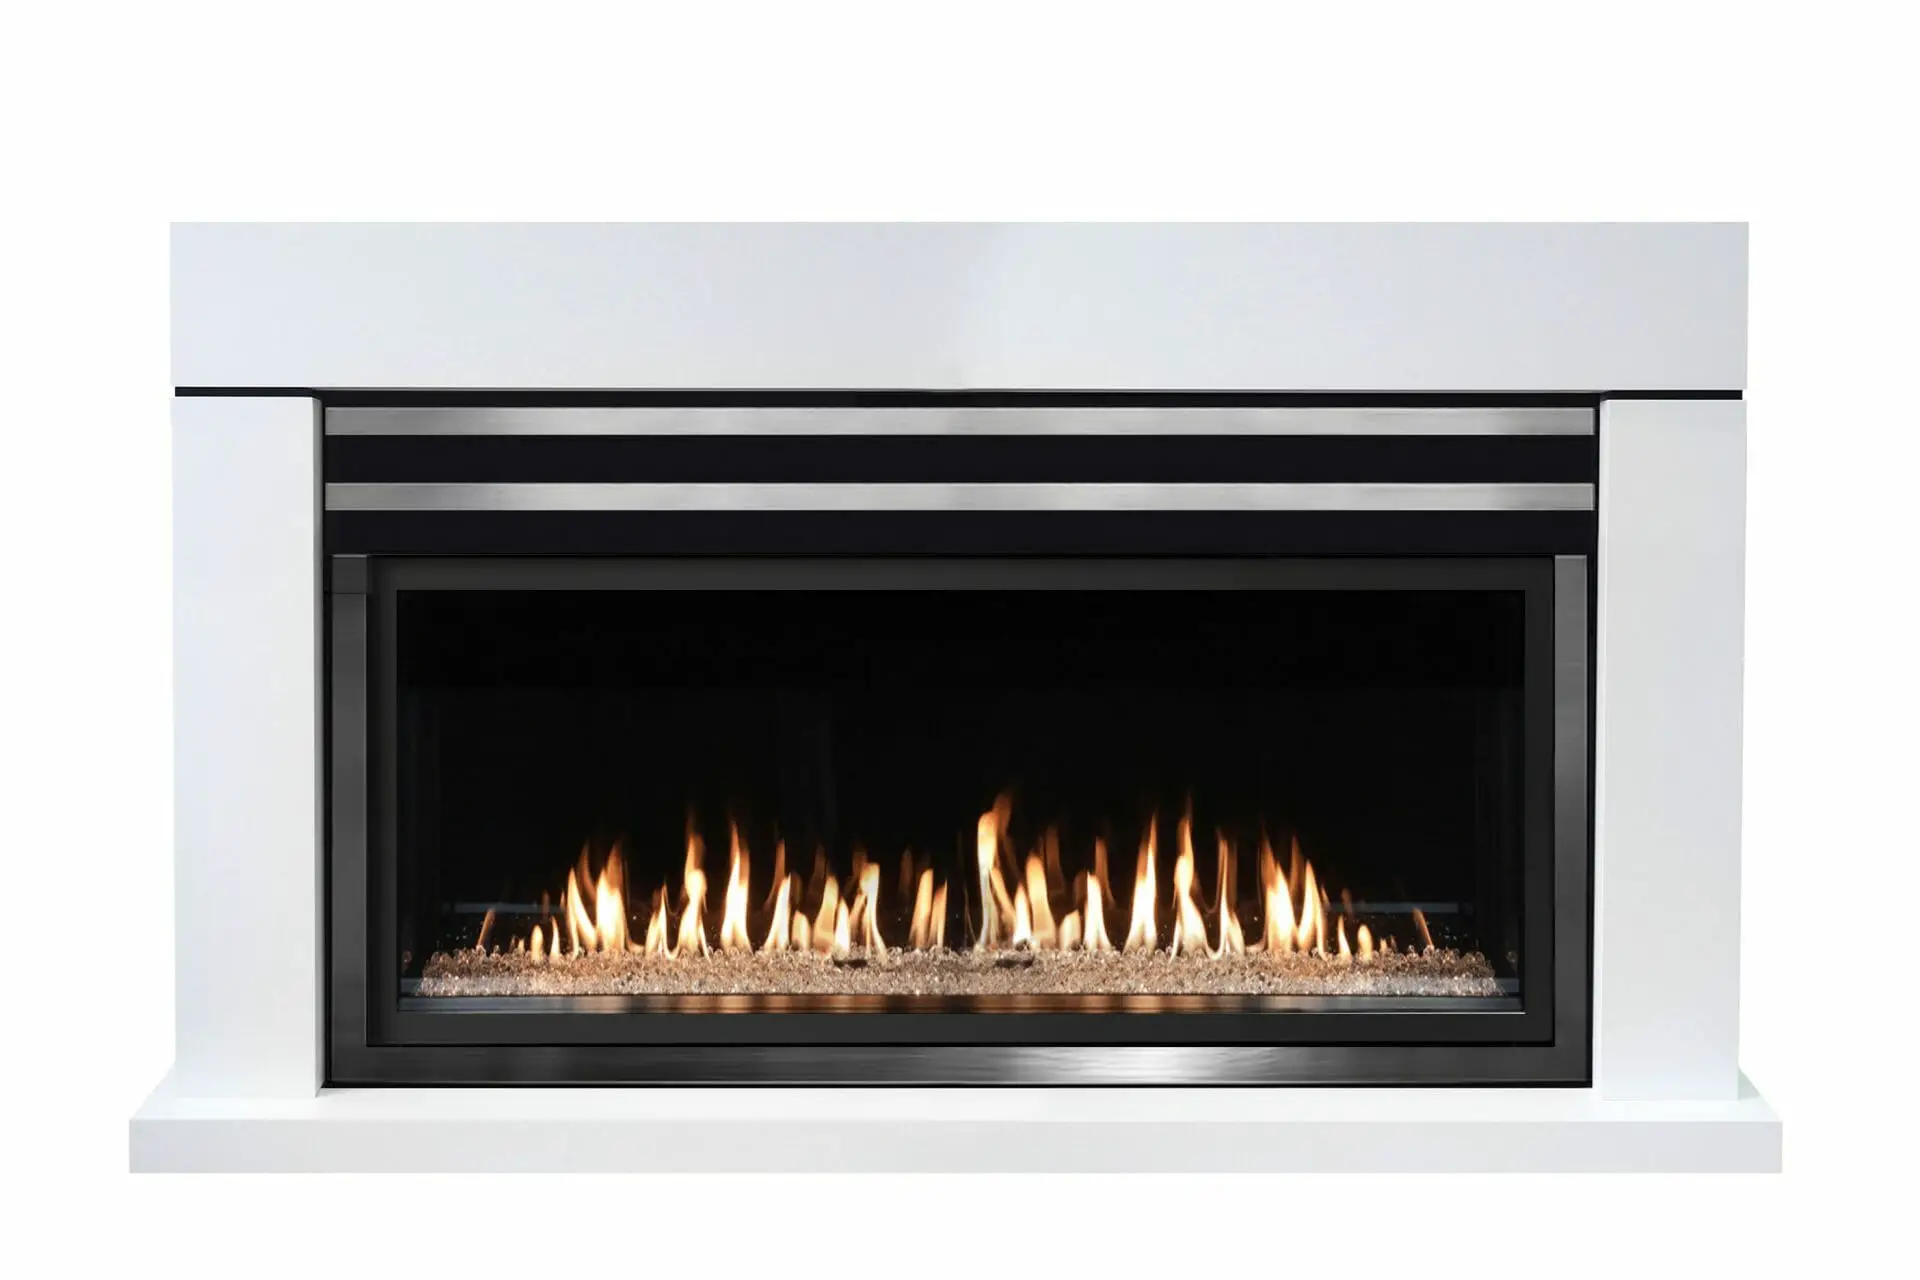 Should You Install a Blower on a Gas Fireplace?